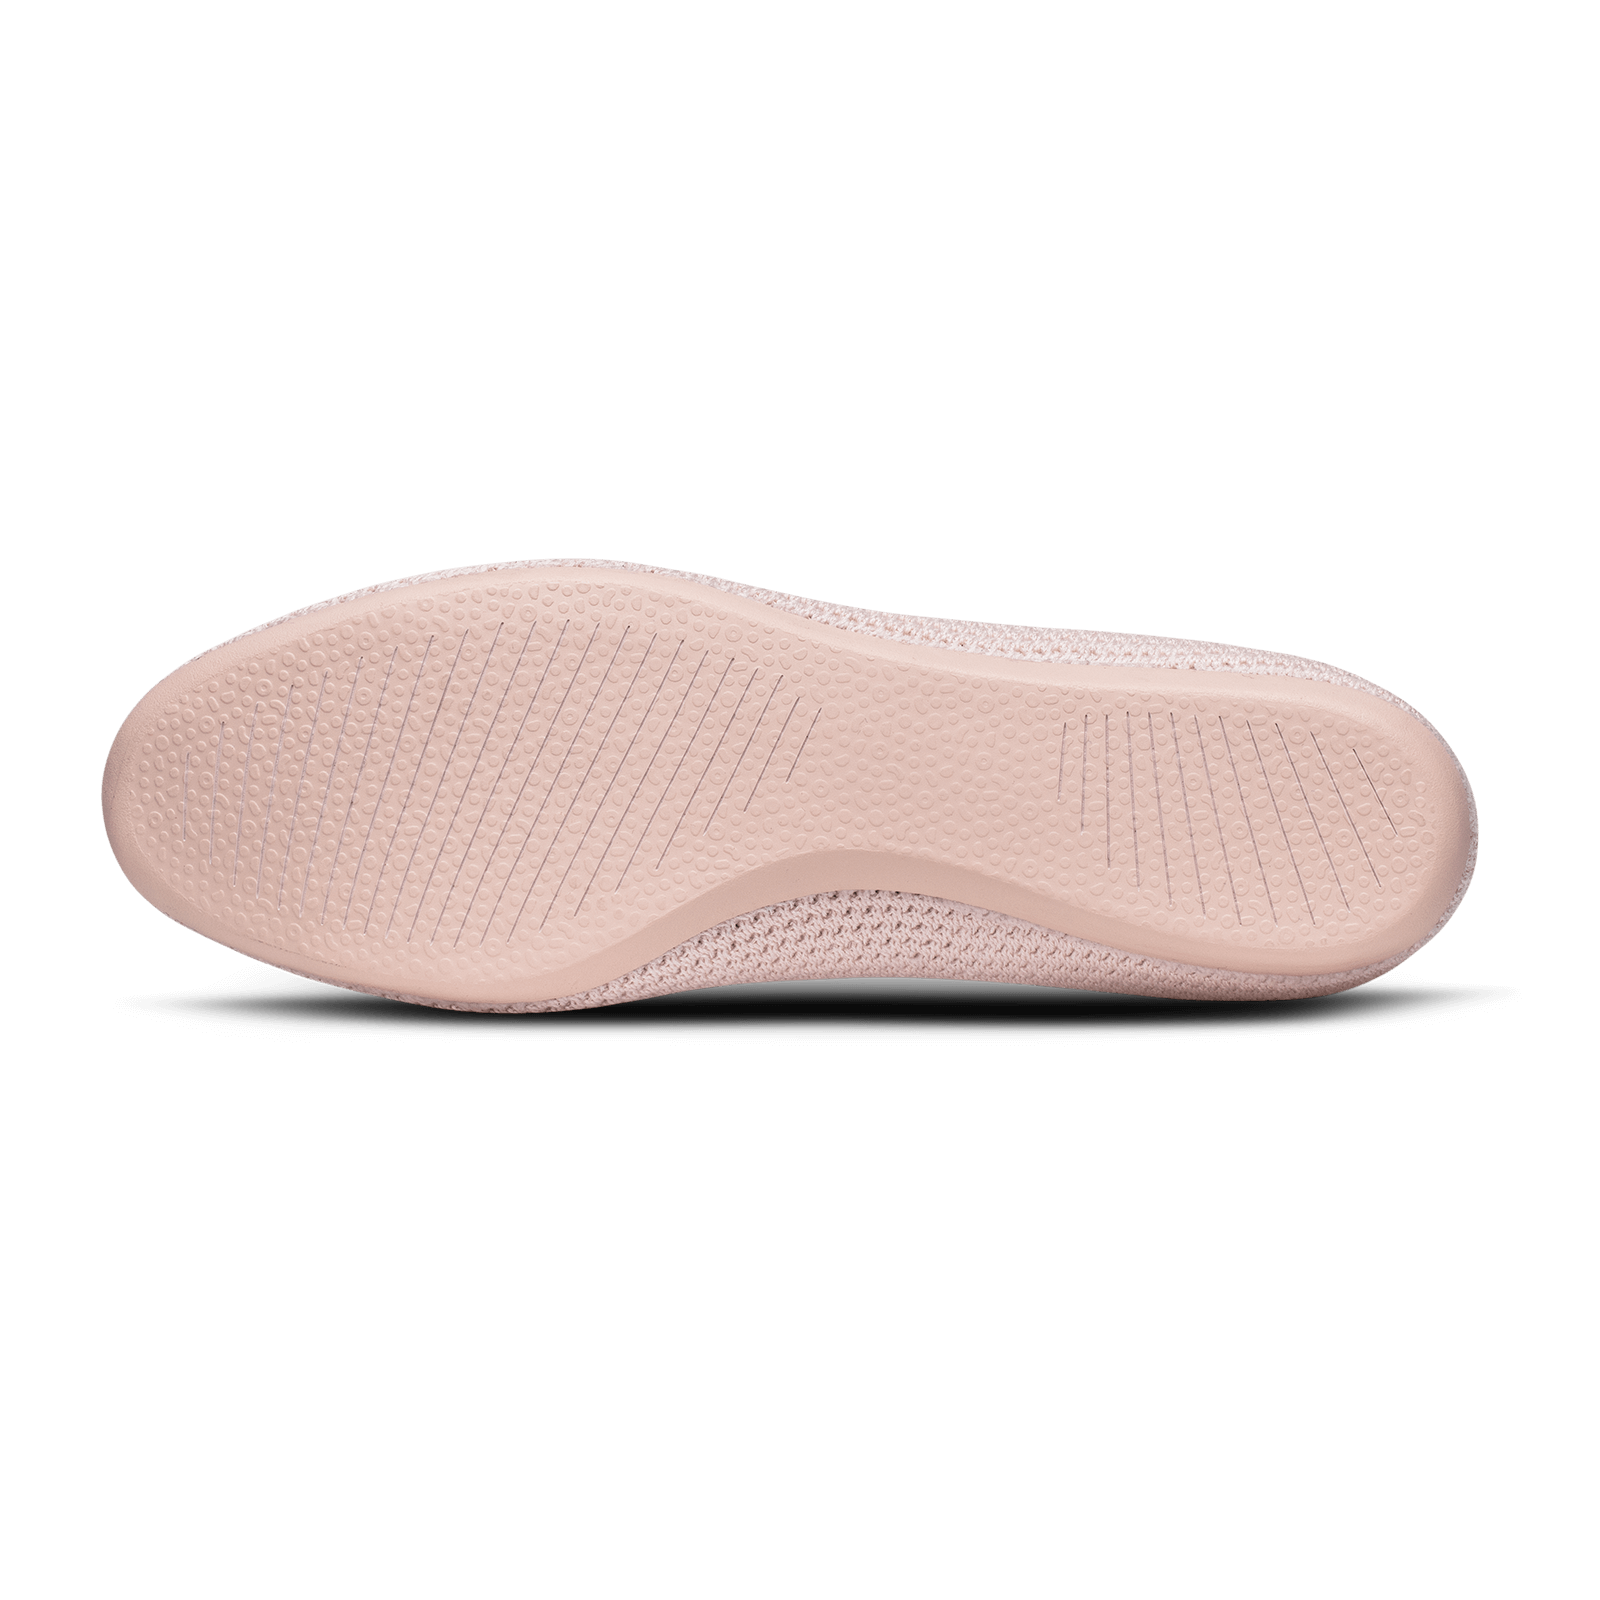 Women's Tree Breezers - Calm Taupe (Calm Taupe Sole)